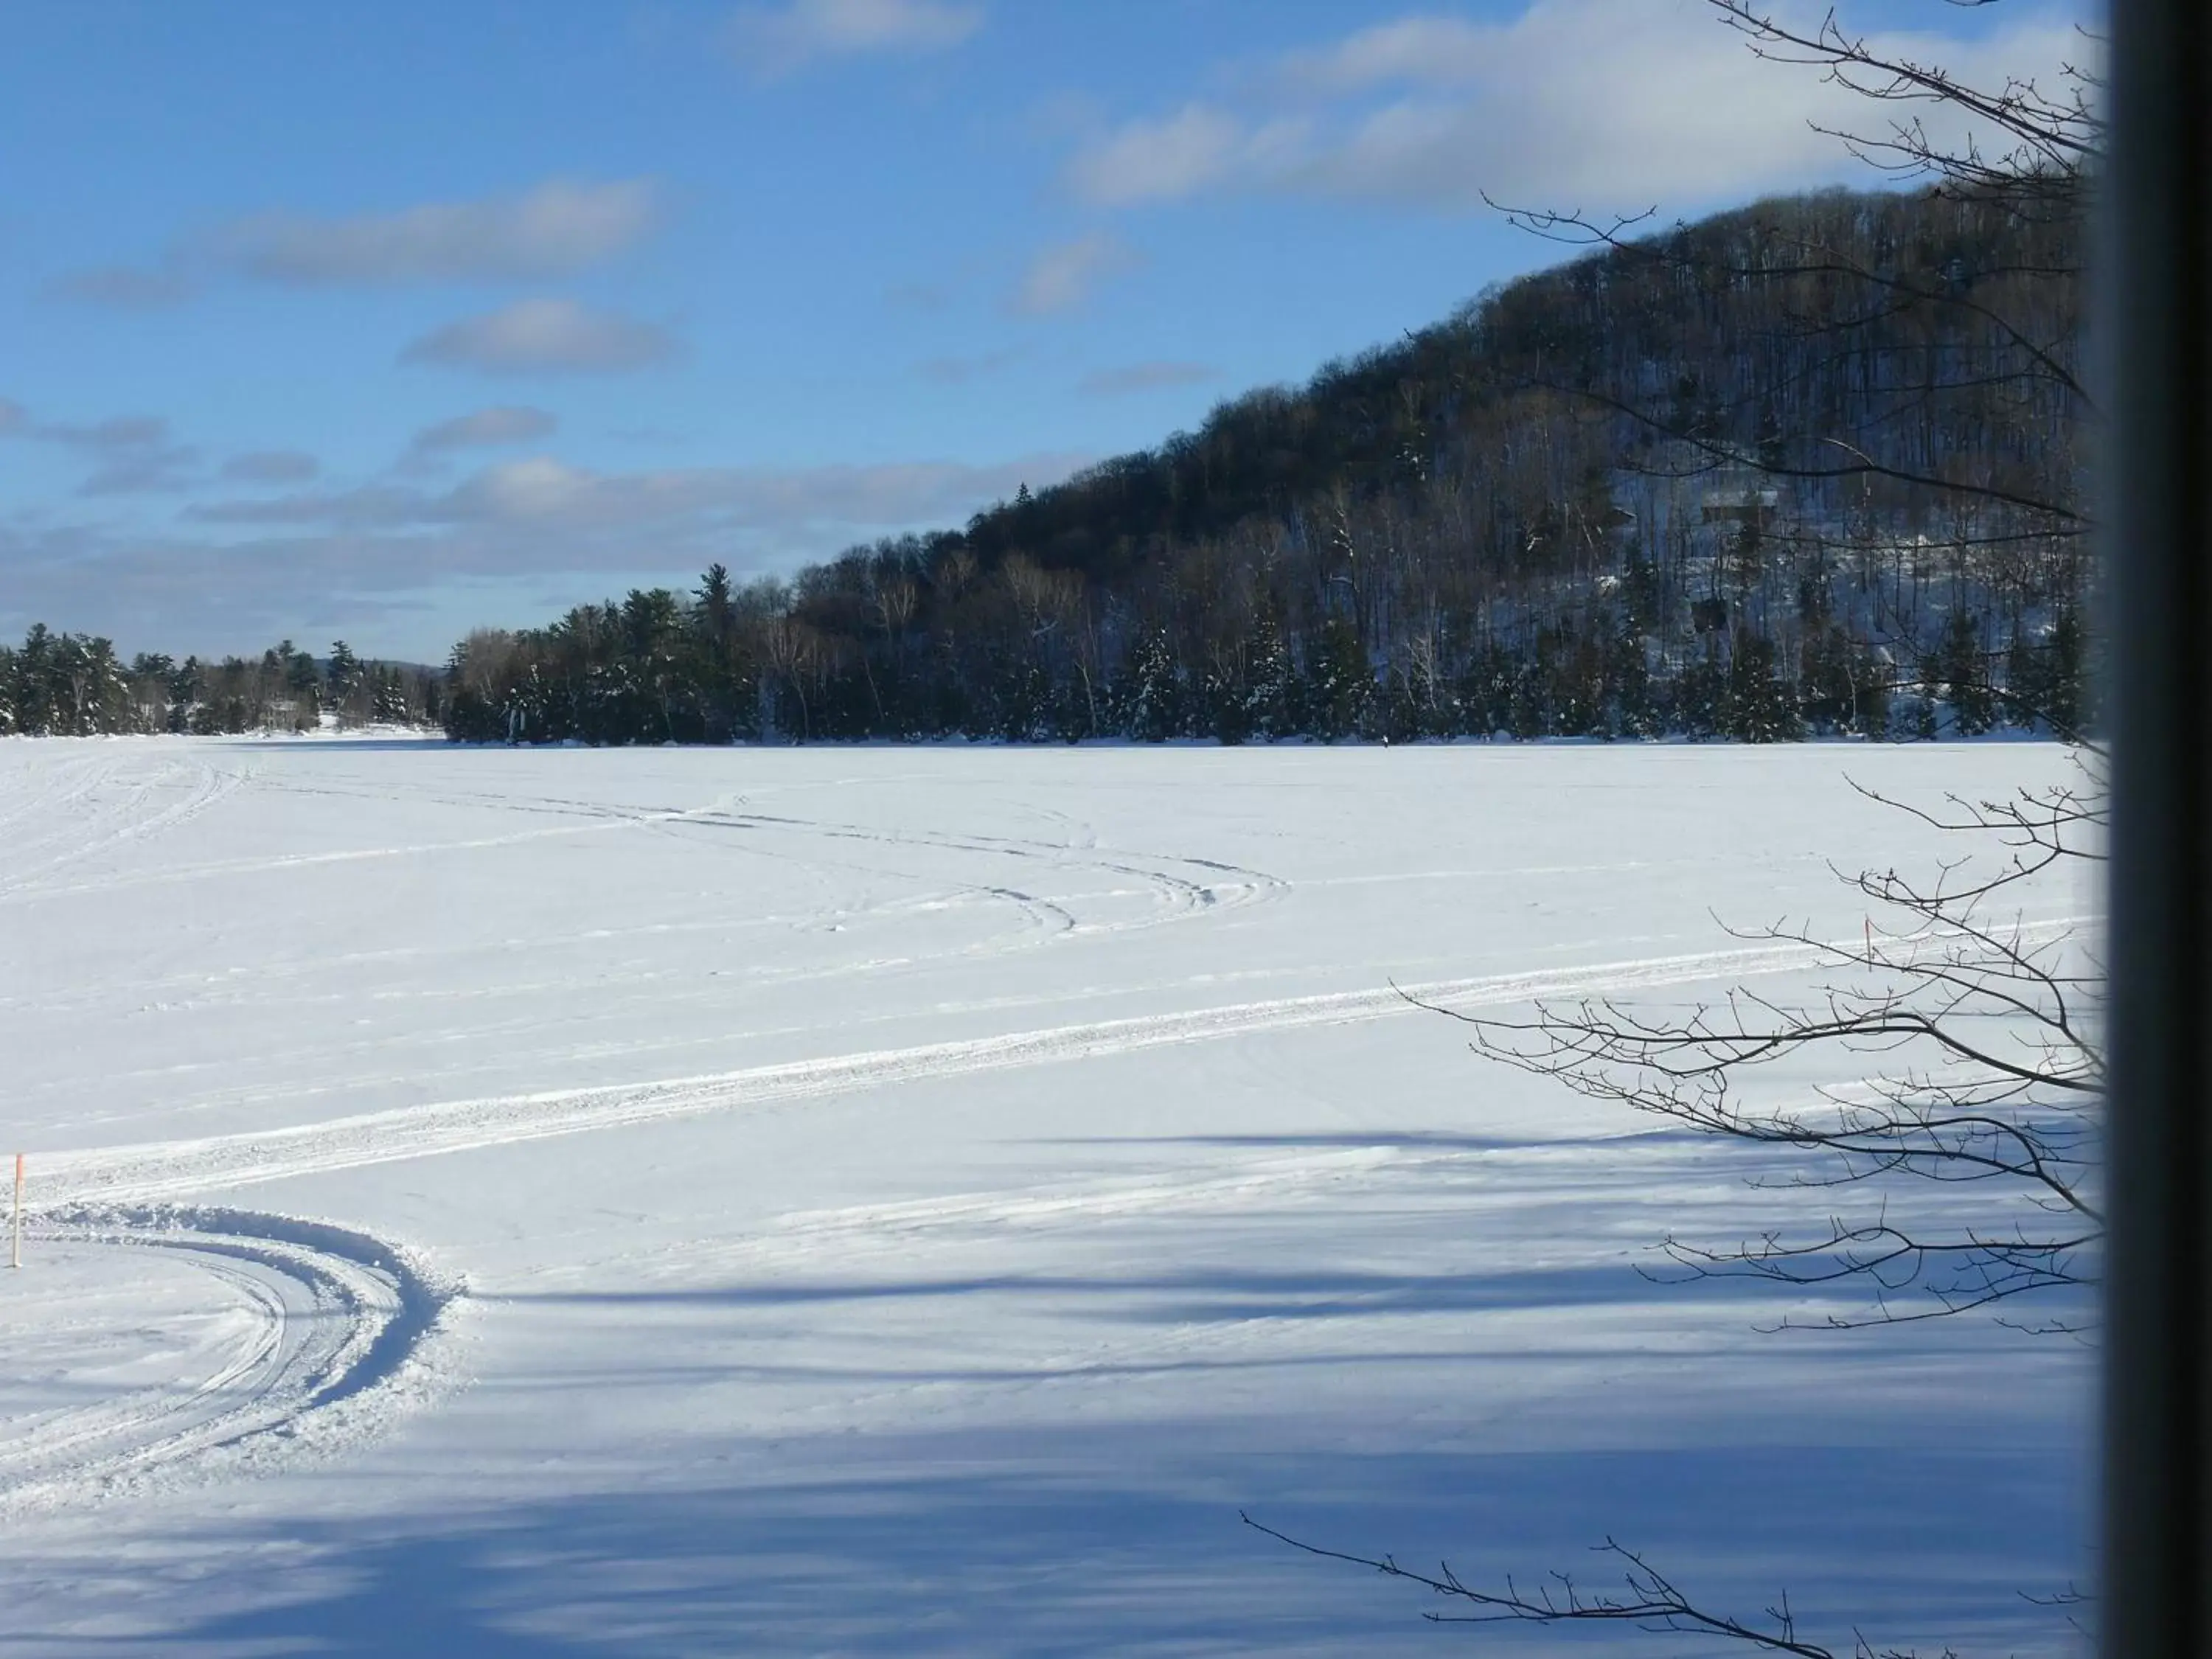 Natural landscape, Winter in Auberge du Lac Morency